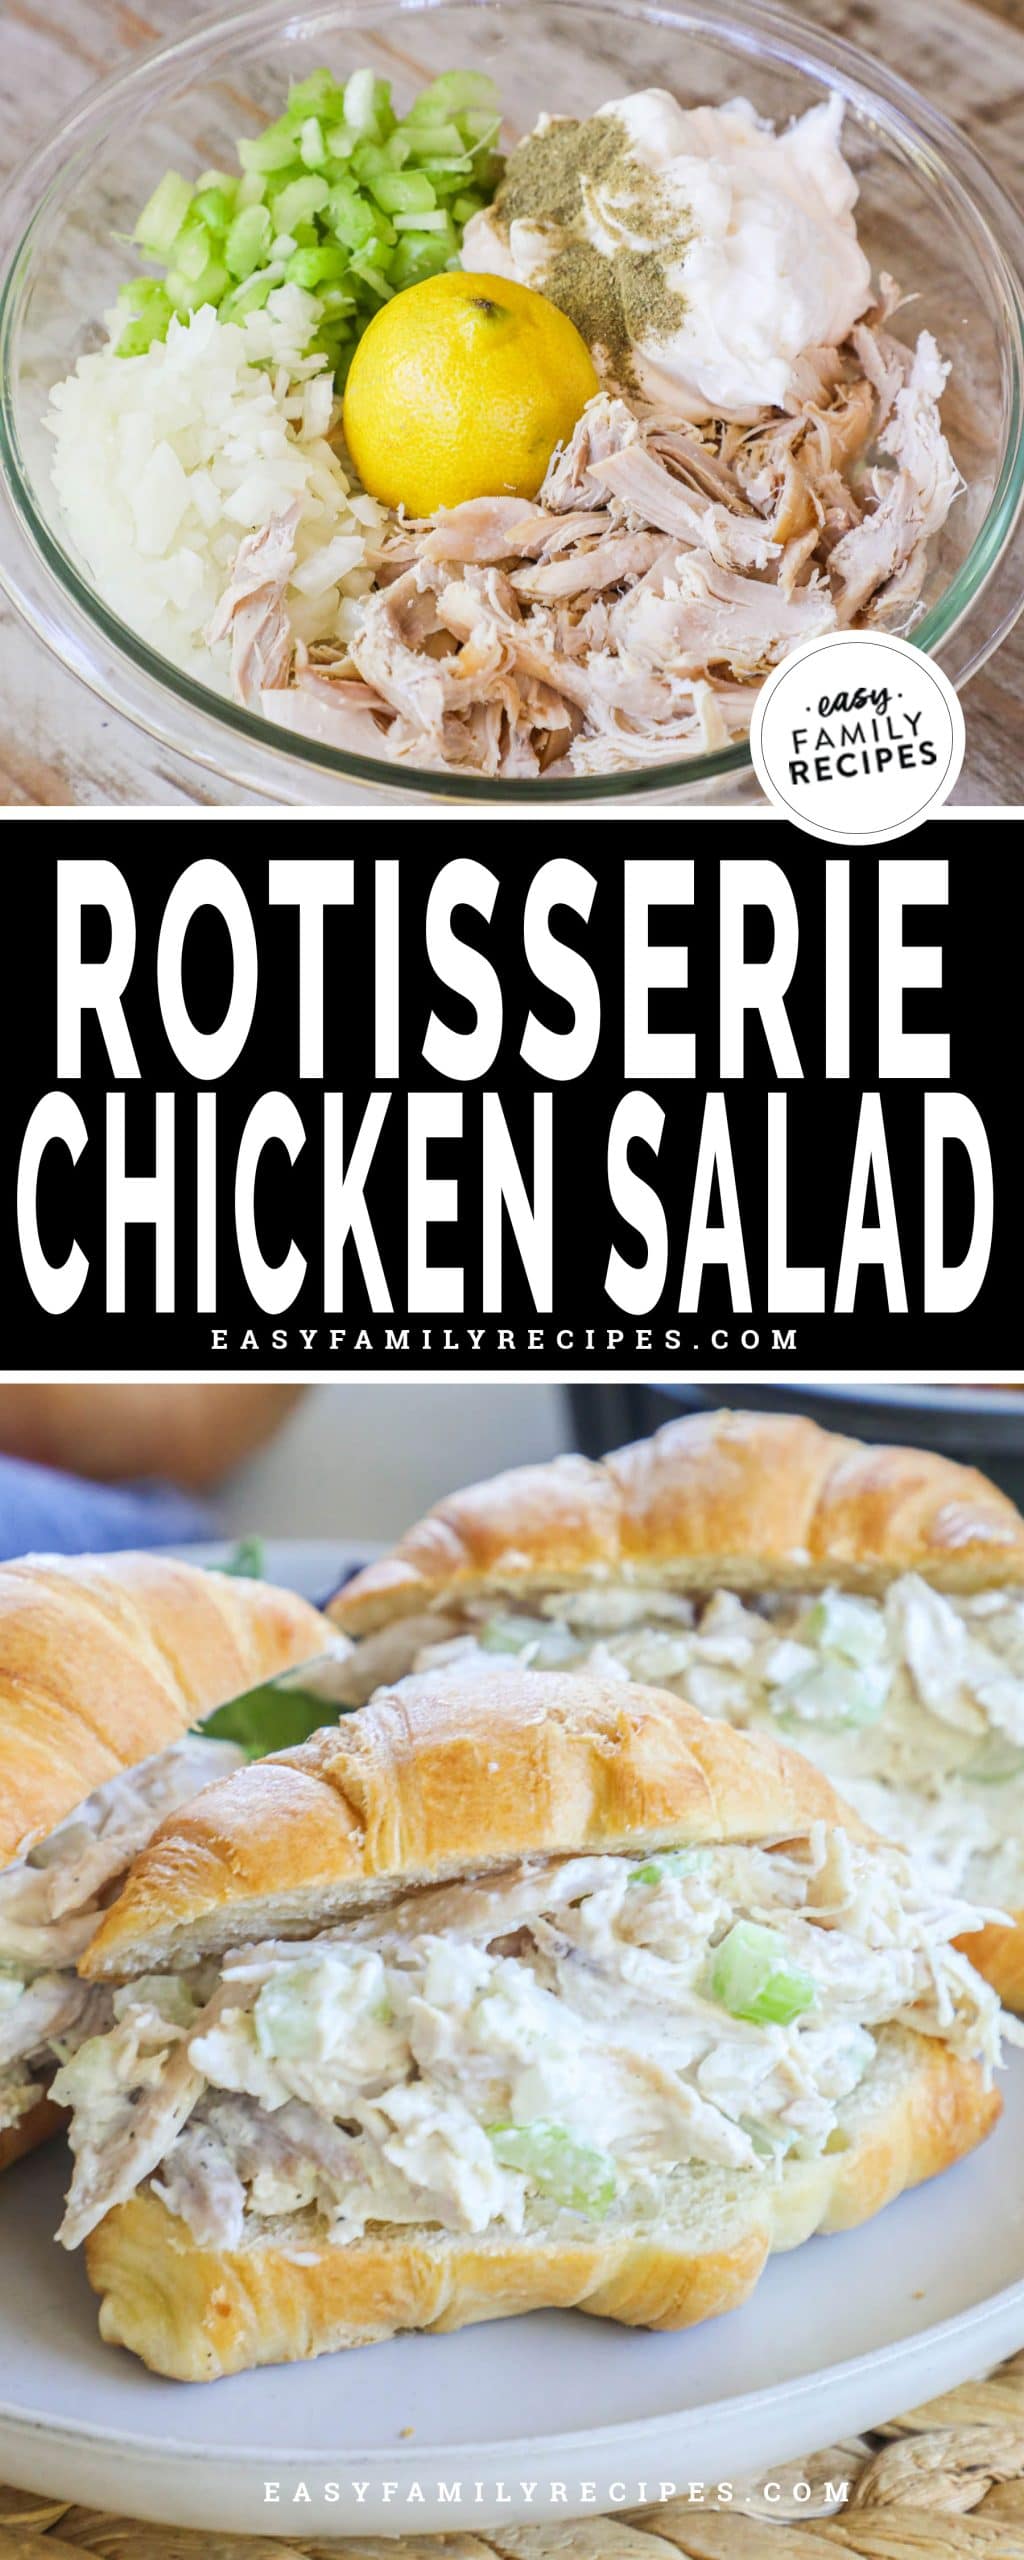 Creamy rotisserie chicken salad with lemon and celery on sliced croissants